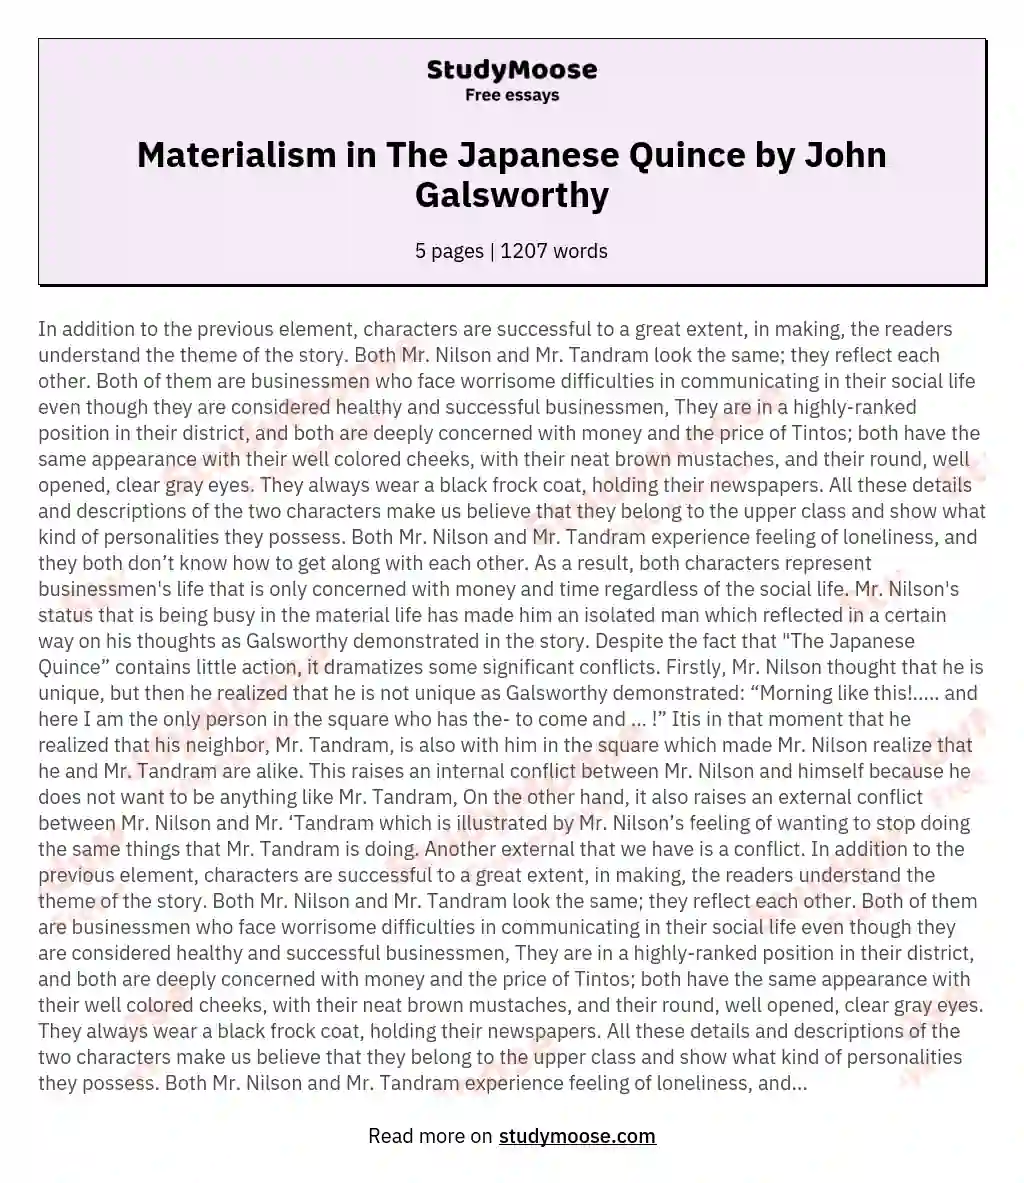 Materialism in The Japanese Quince by John Galsworthy essay